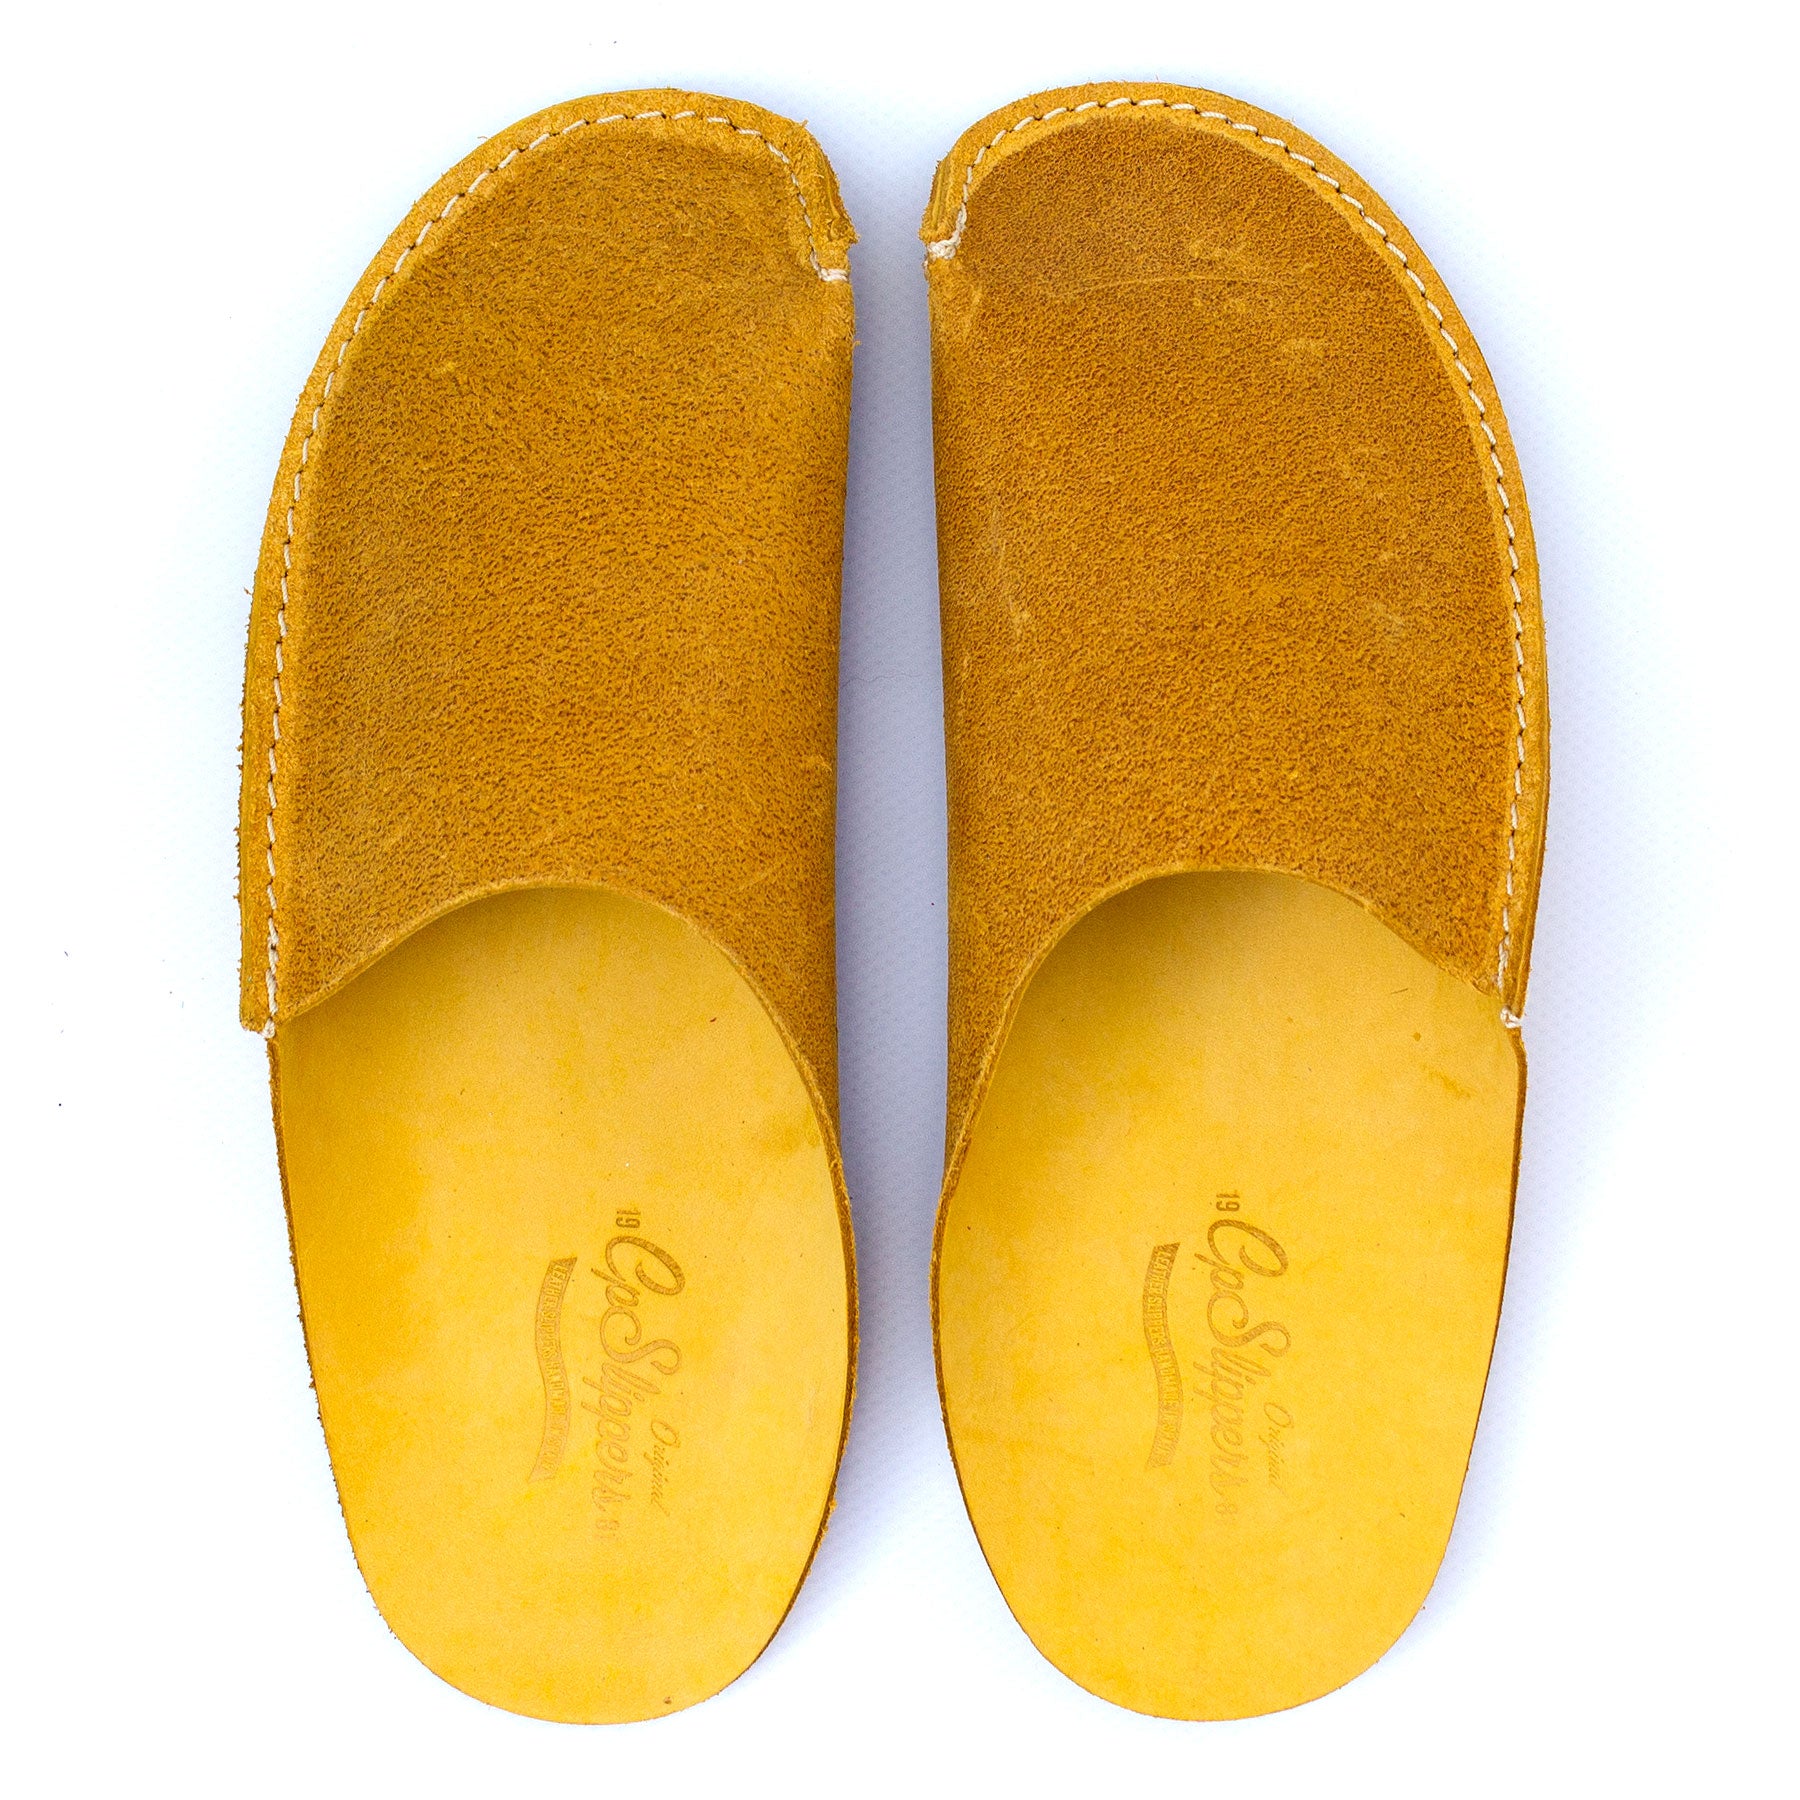 huh Vent et øjeblik Sicilien Yellow Leather Slipper for men and women by CP Slippers Minimalist